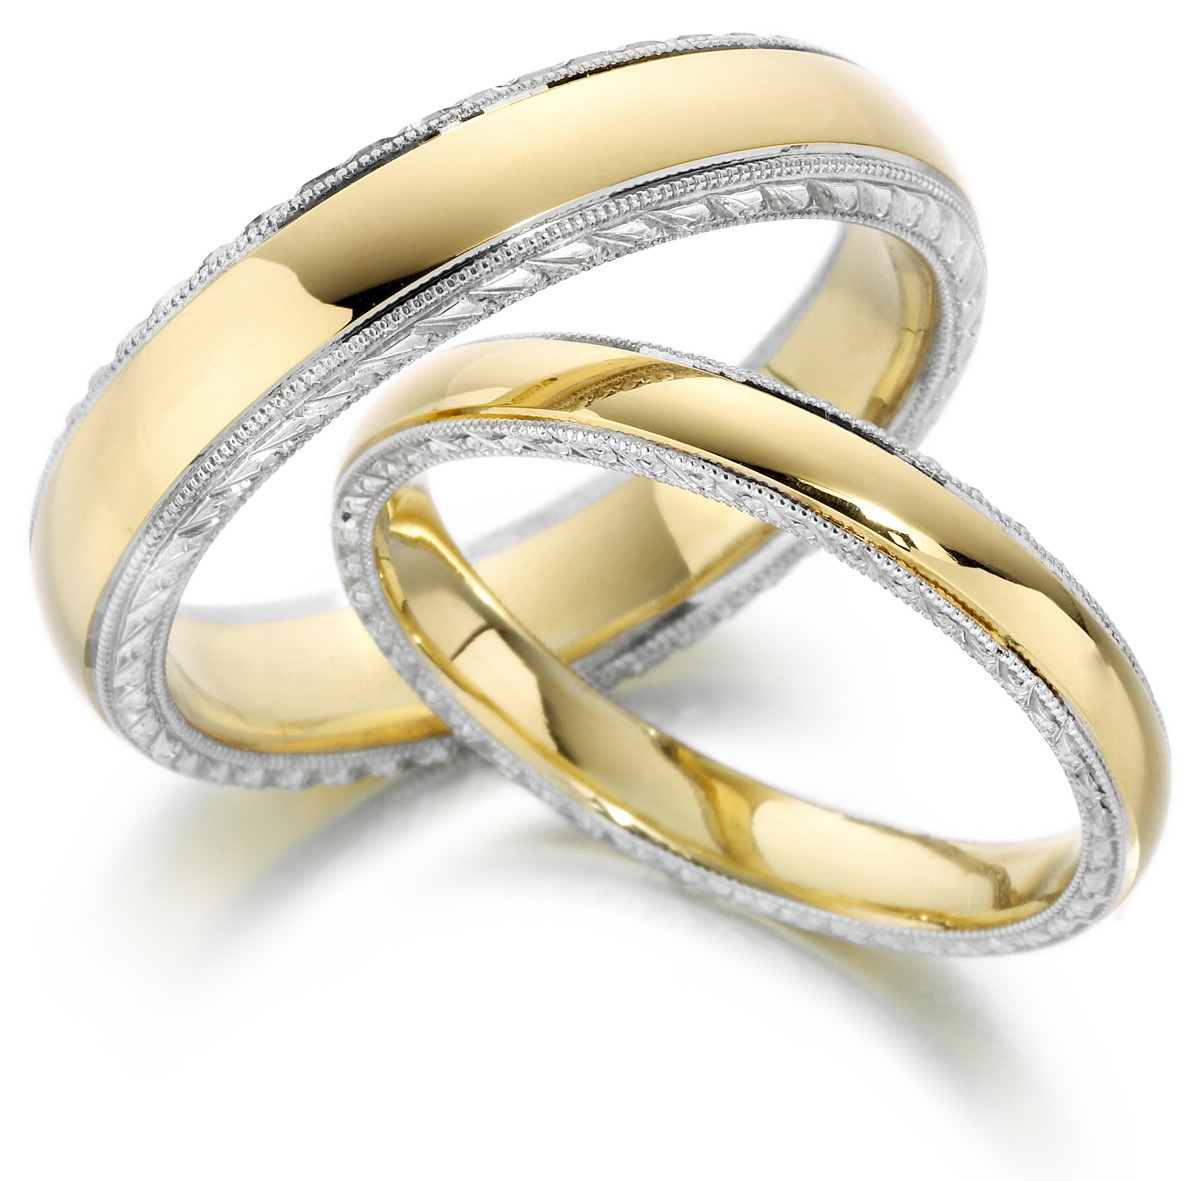 Pics Of Wedding Rings
 I am now an official supplier for Charles Green wedding